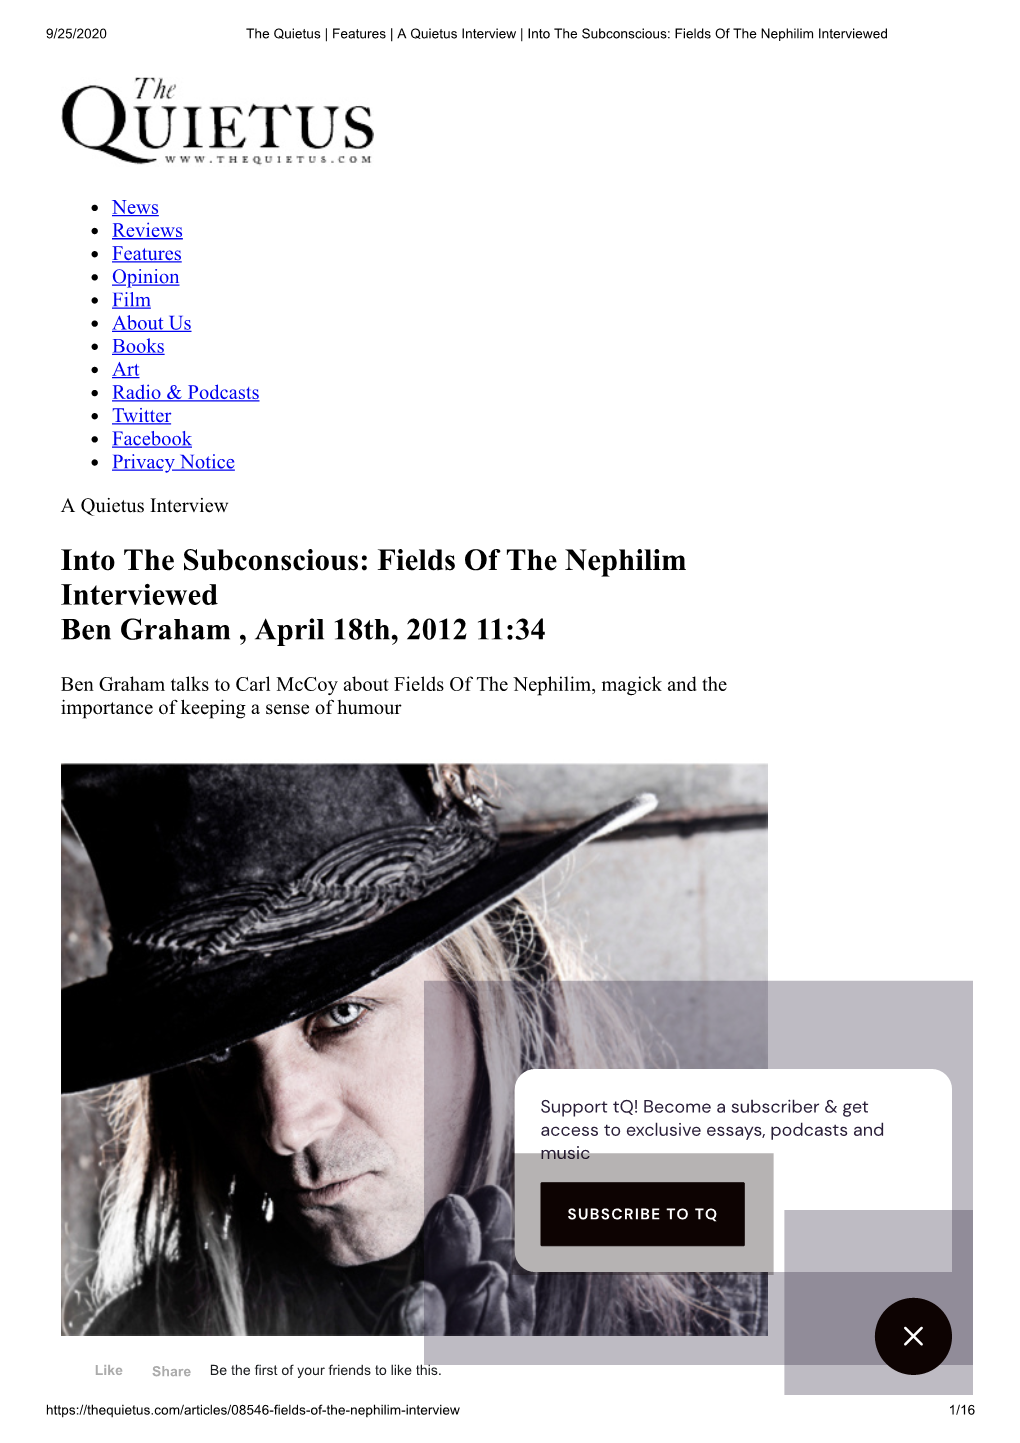 Into the Subconscious: Fields of the Nephilim Interviewed